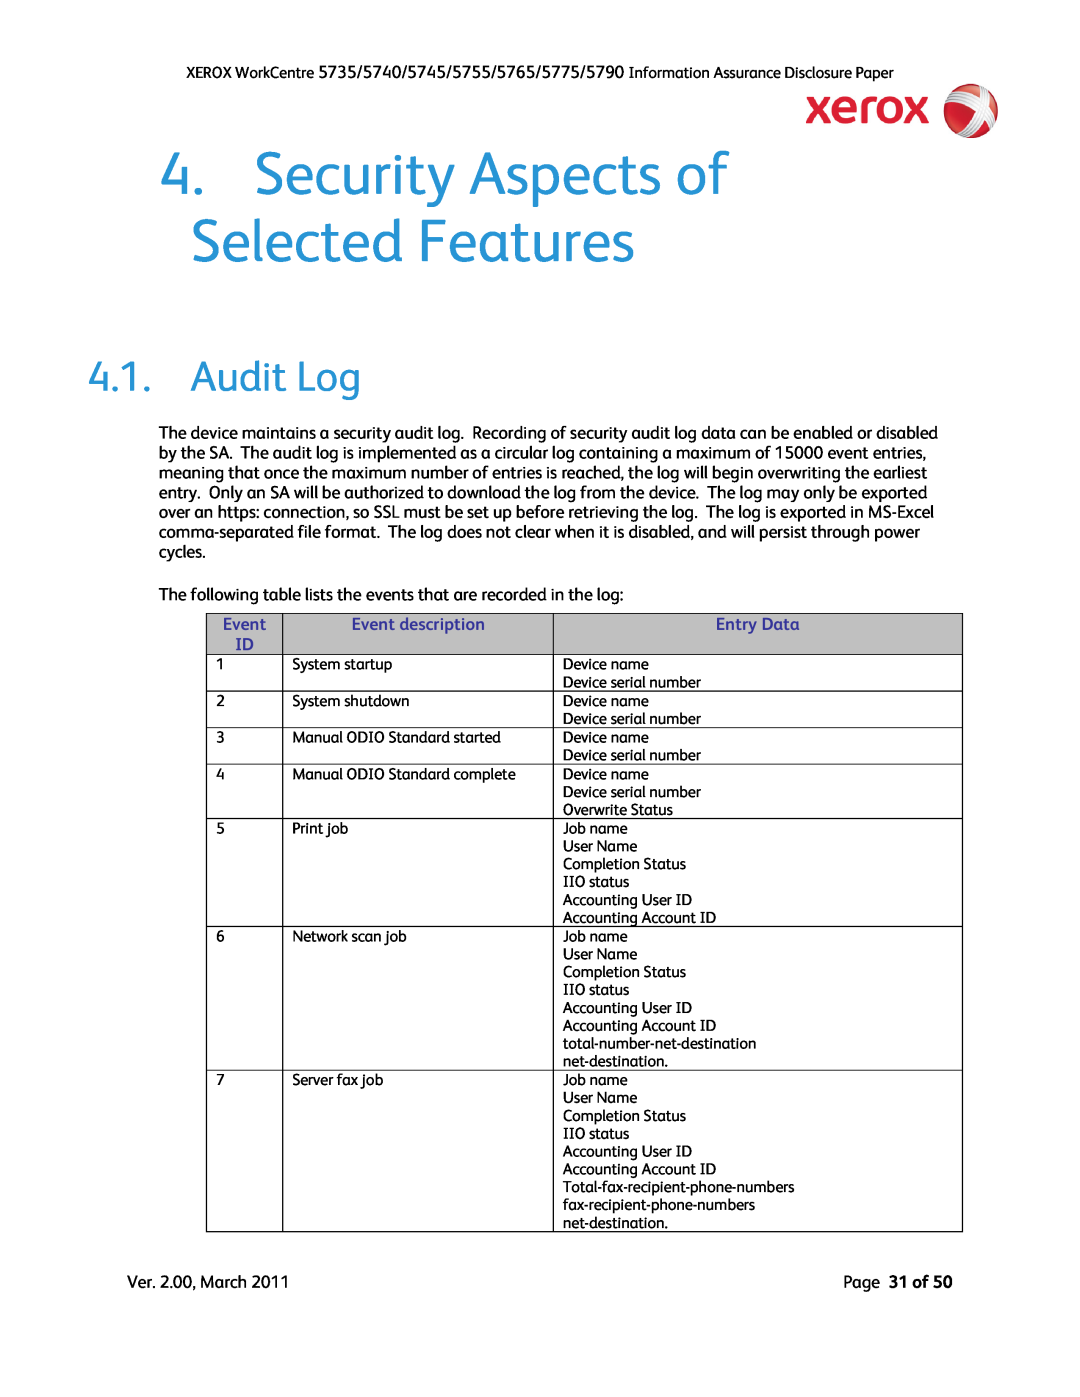 Xerox 5775, 5790, 5745, 5740, 5735, 5755 Audit Log, Event description, Entry Data, Security Aspects of Selected Features 